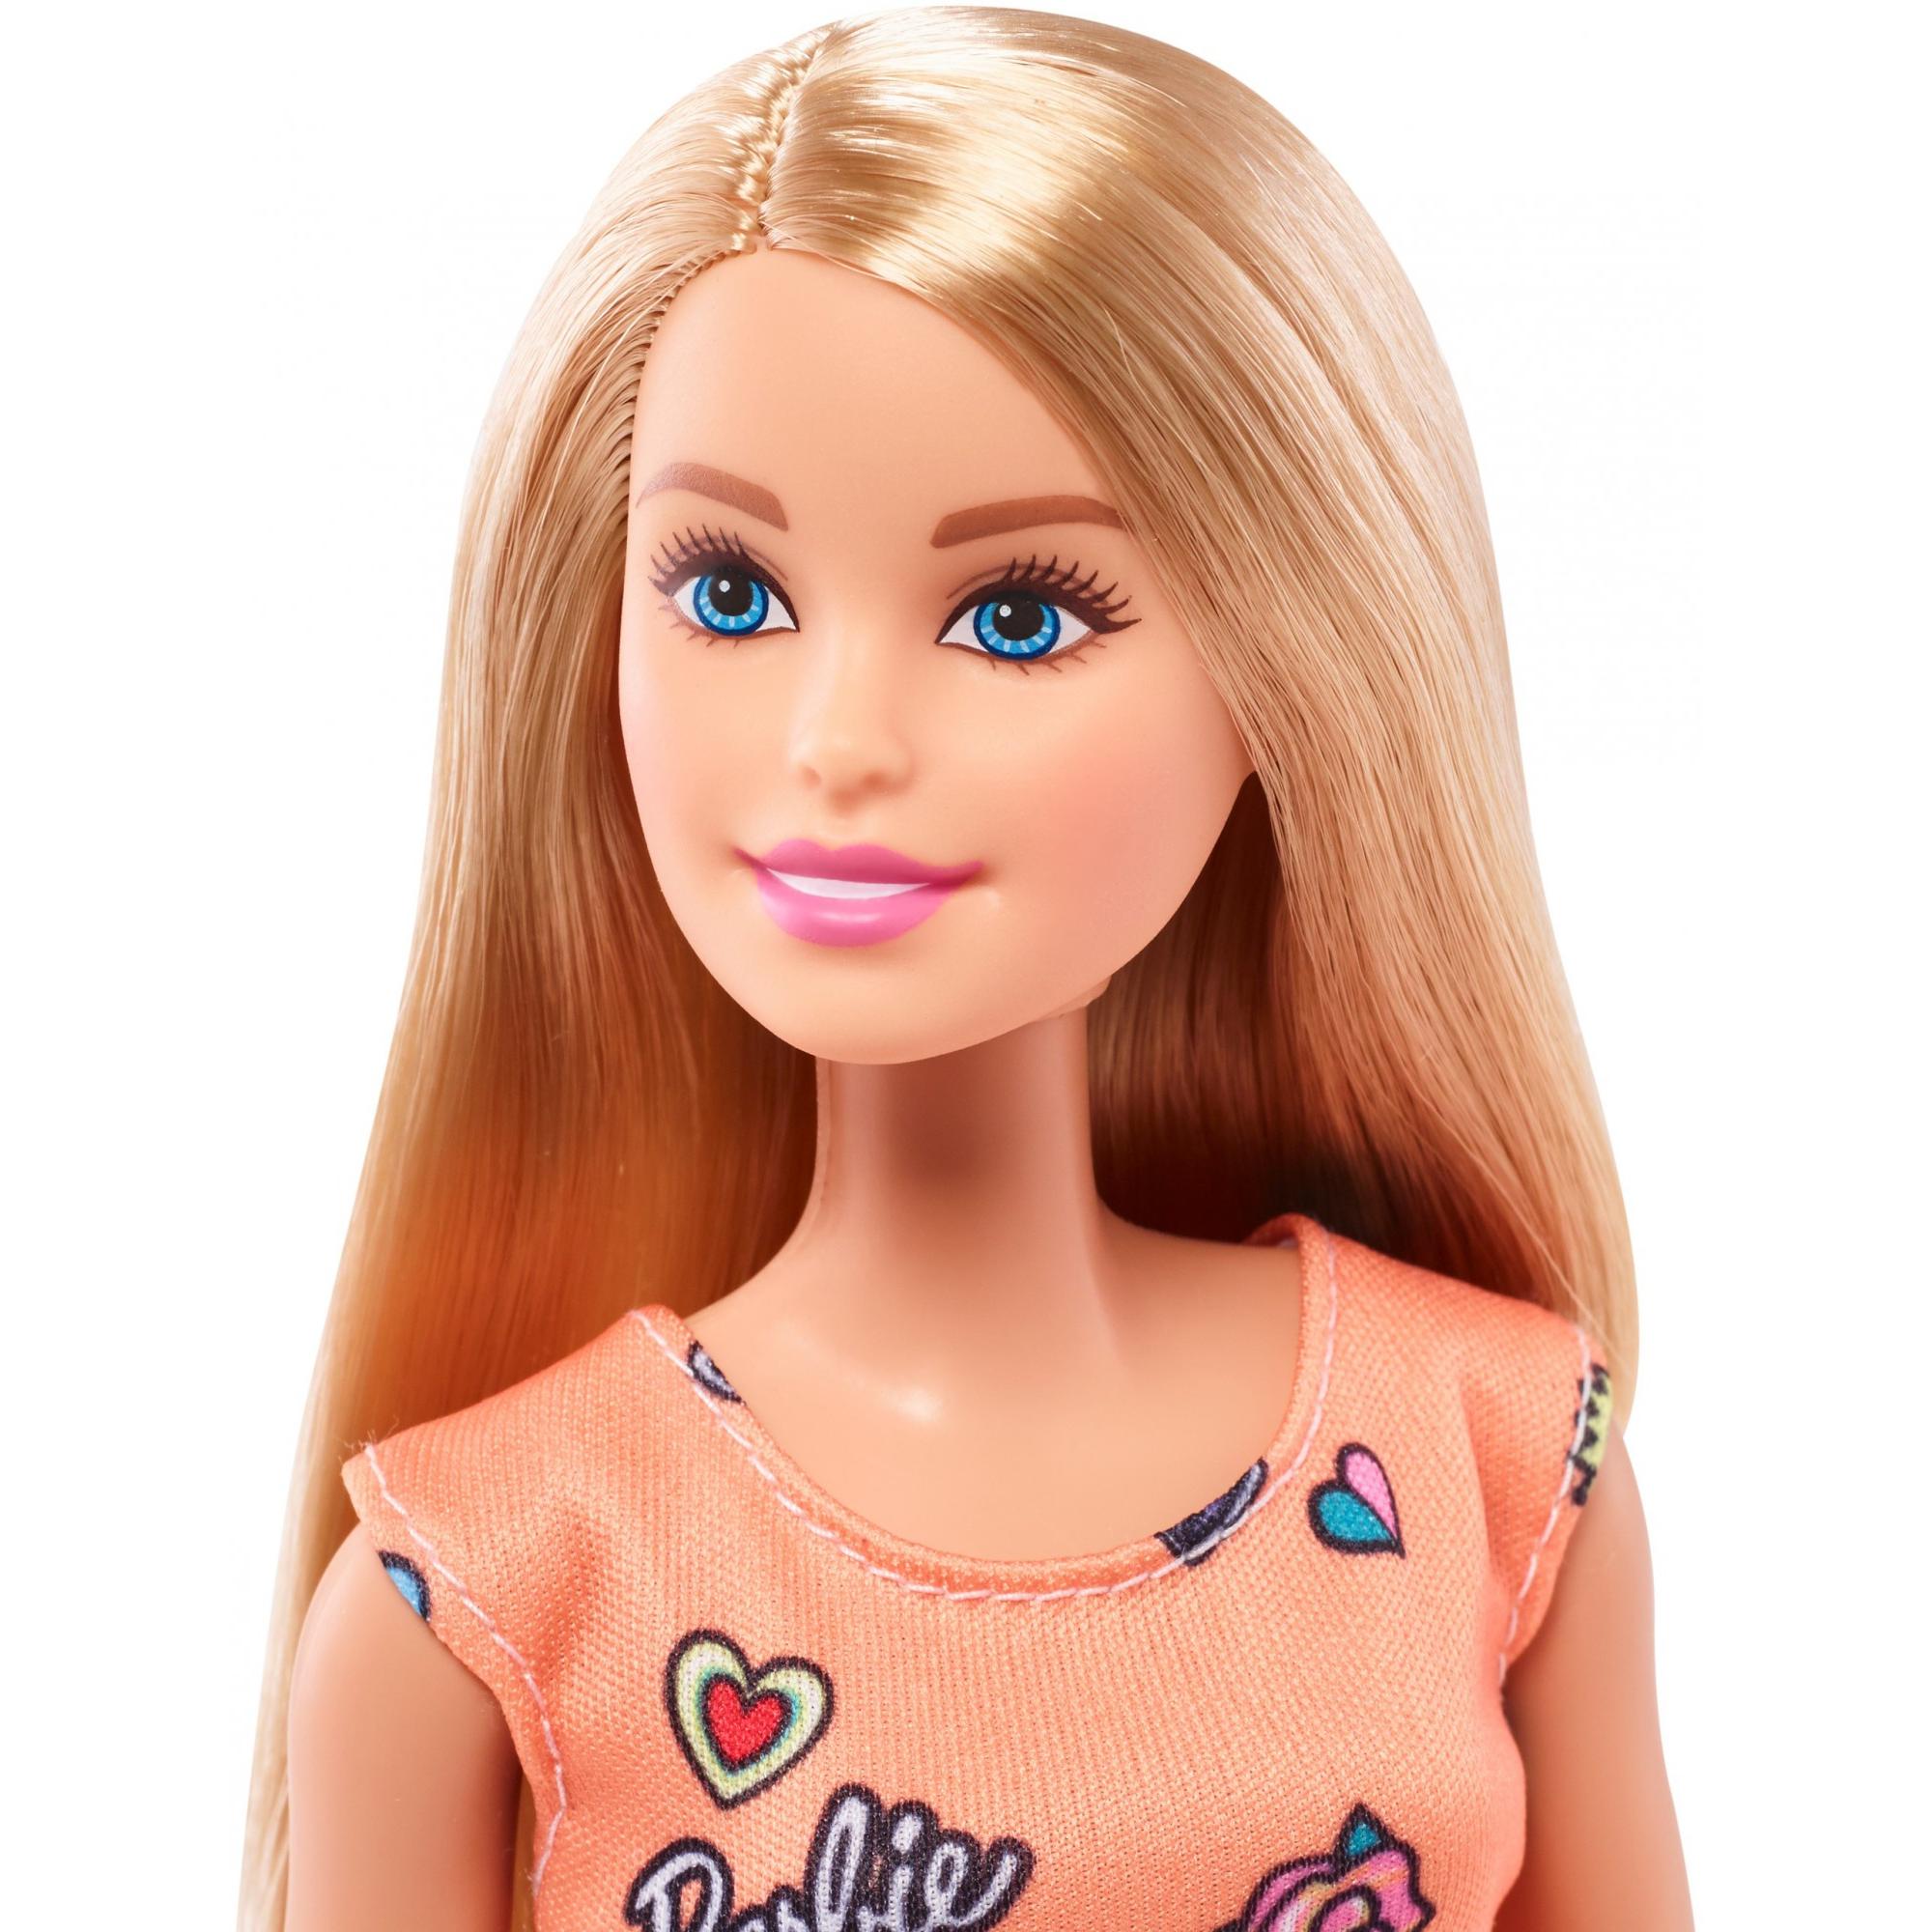 Barbie Fashion Orange Graphic Dress Doll with Blonde Hair - image 3 of 6